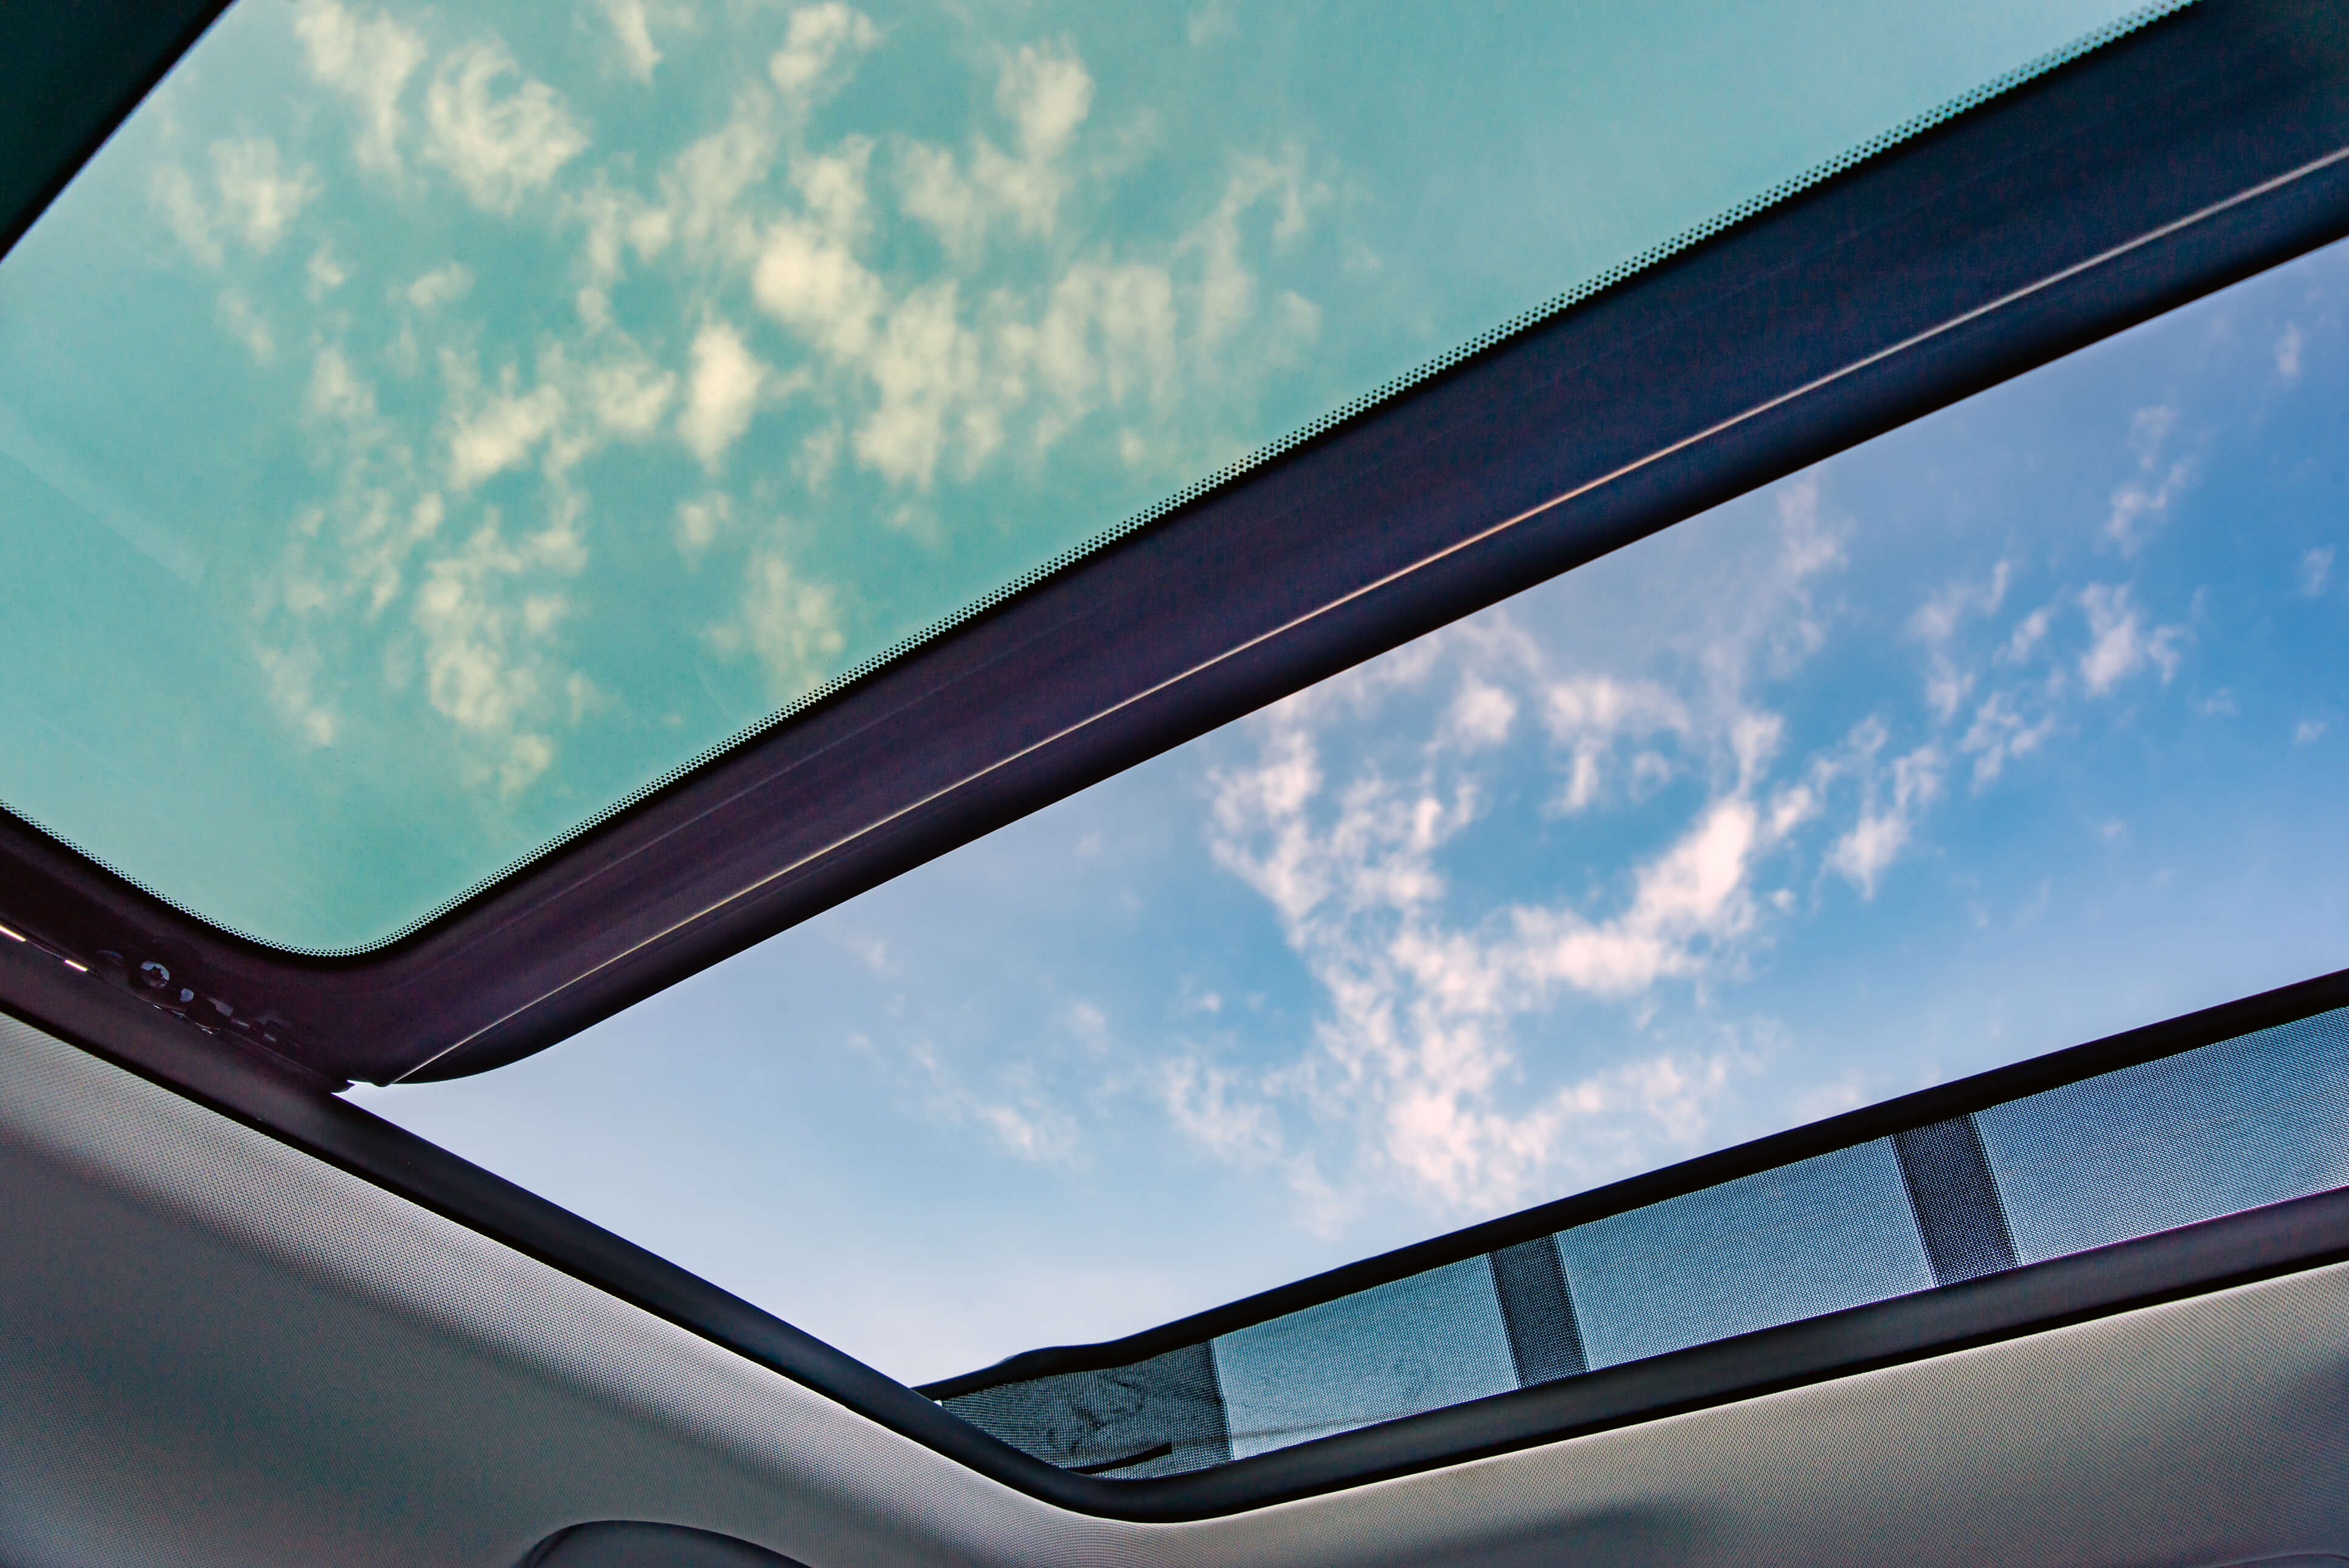 A sunroof in a passenger car.